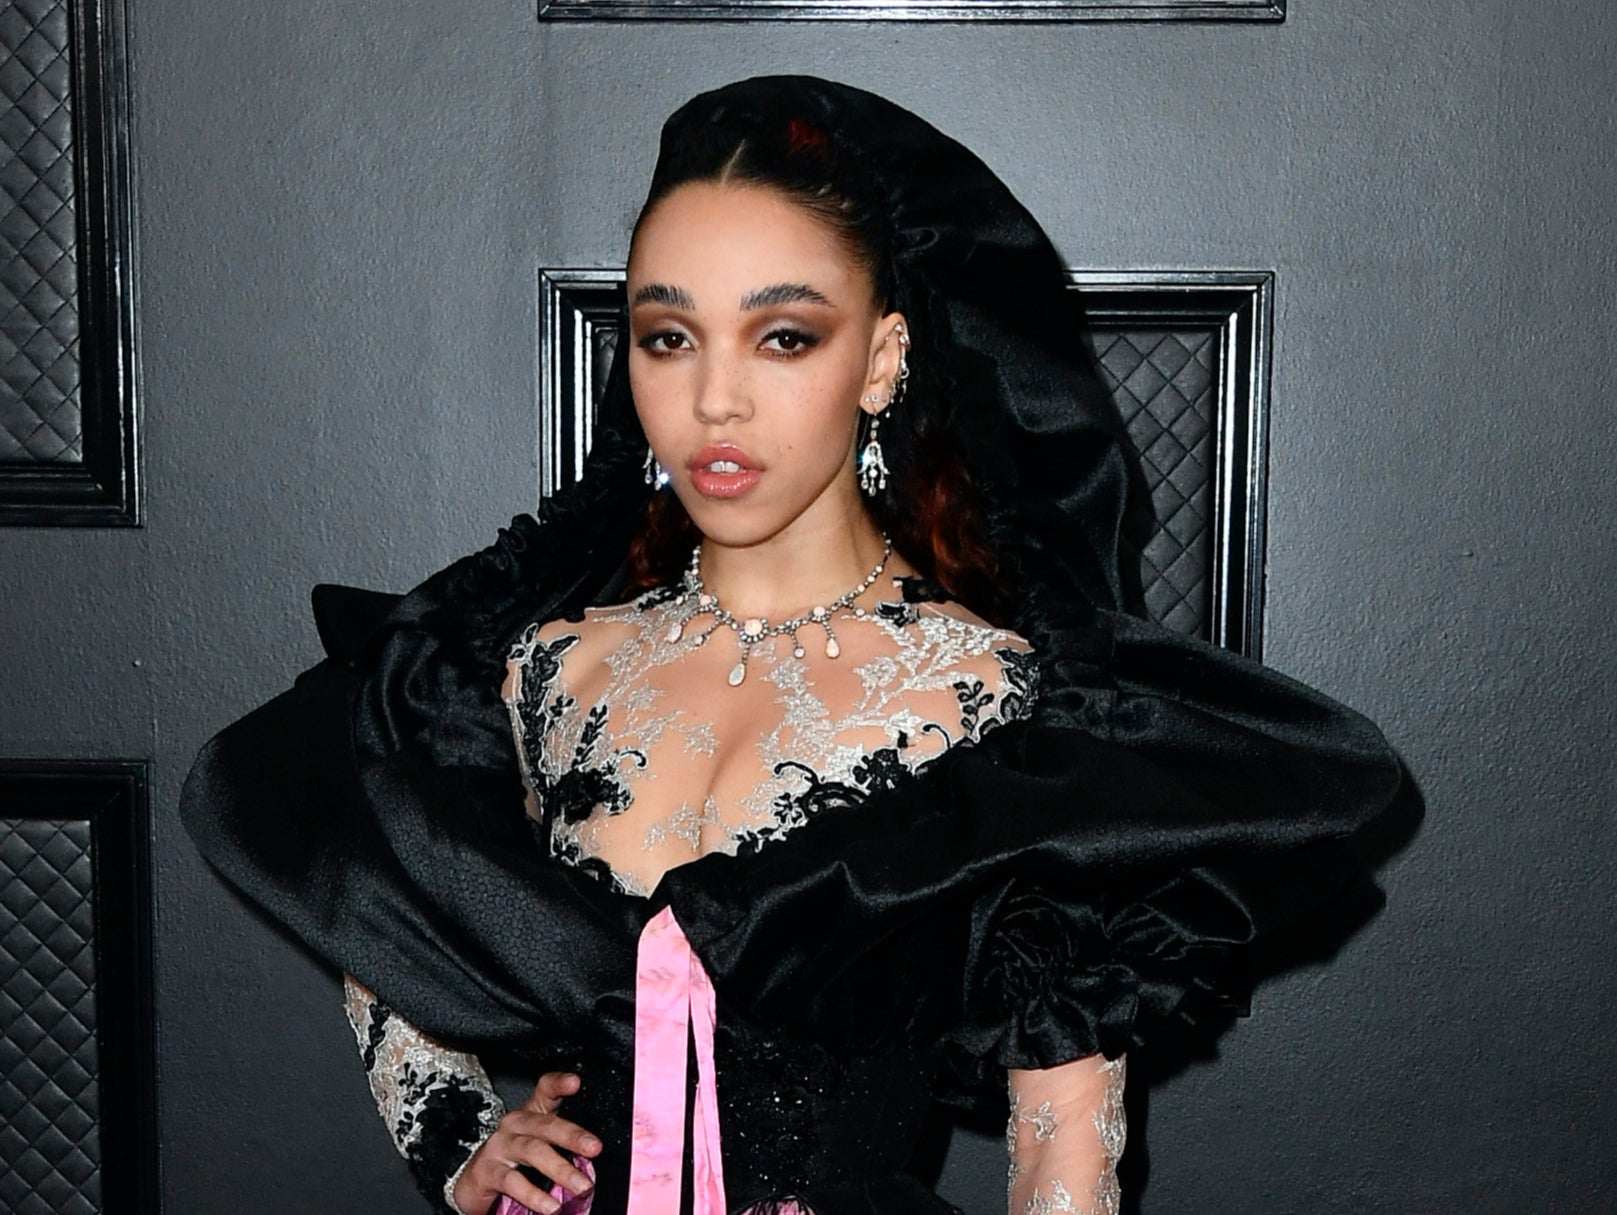 FKA twigs refuses to answer questions about her alleged abusive relationship with Shia LeBeouf